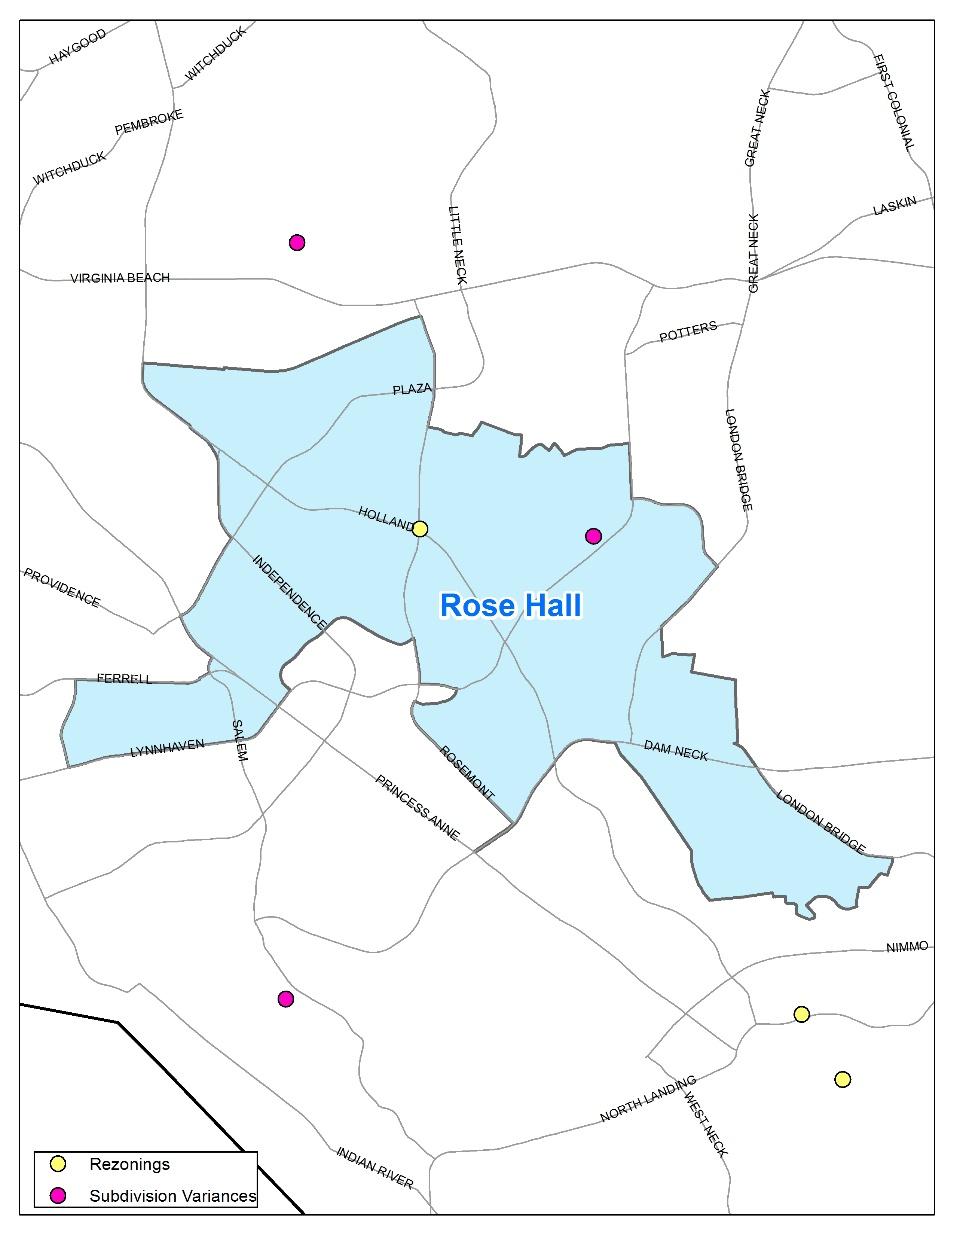 Rose Hall 1 Rezoning 1 Business 1